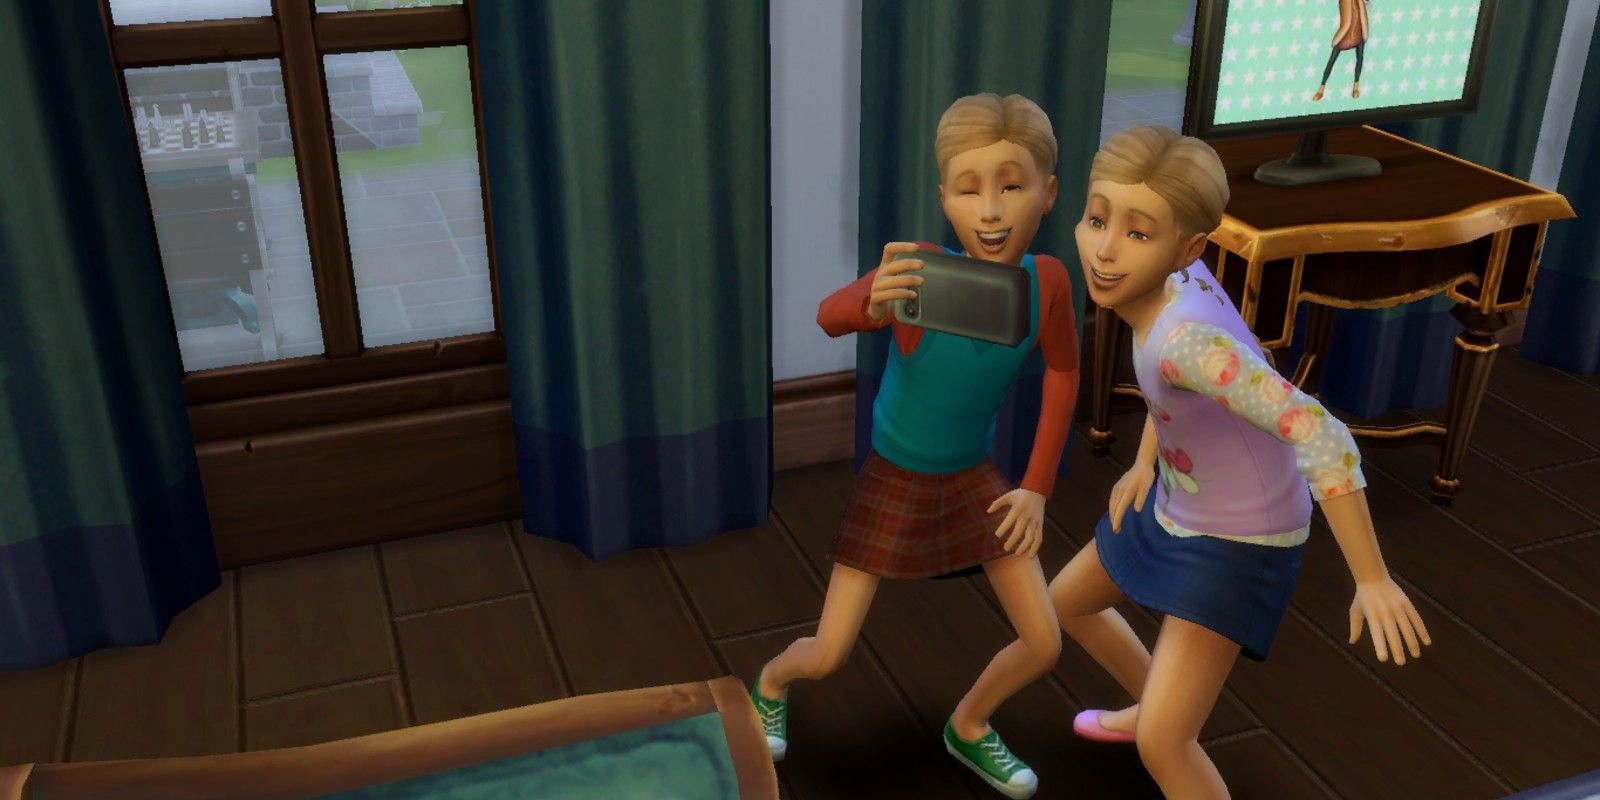 Games were u can get pregnant and have a family How To Have Twins Triplets Other Multiple Pregnancies In Sims 4